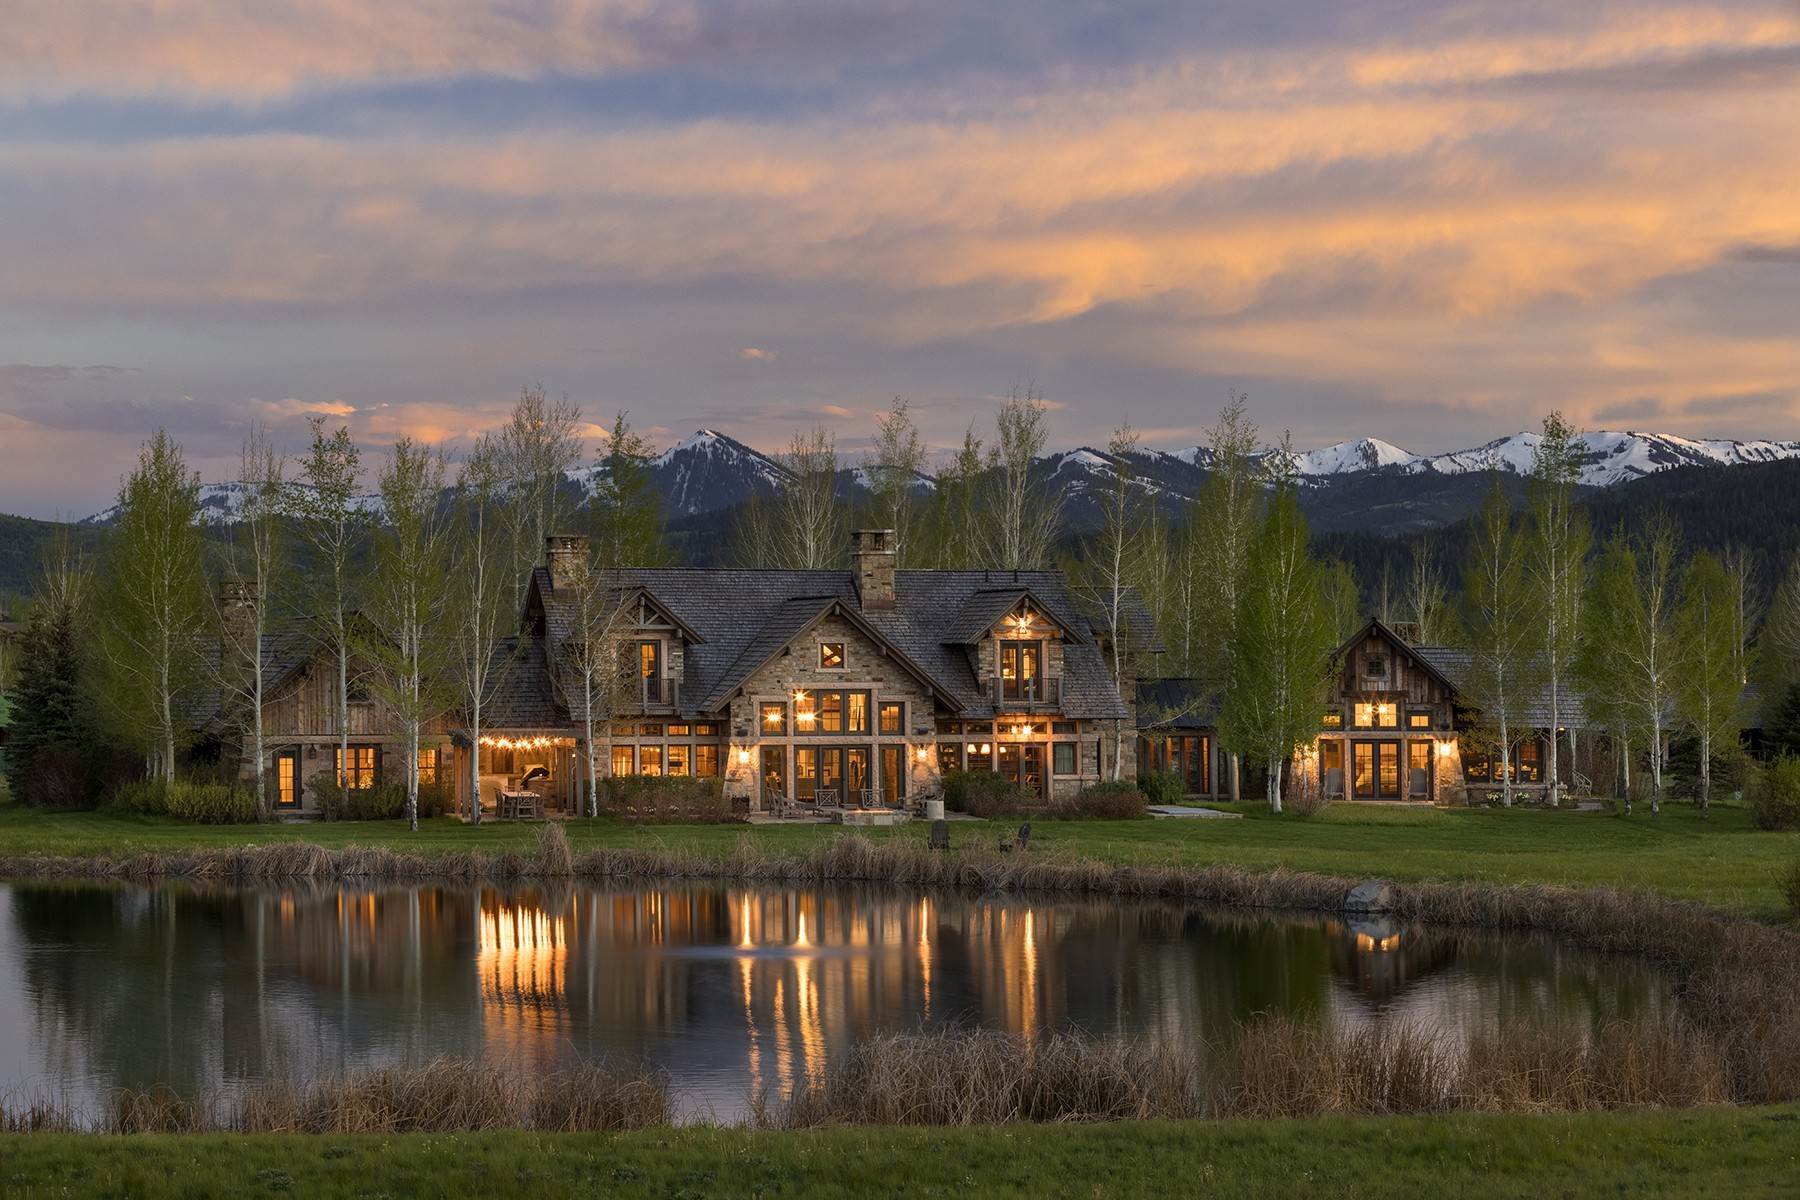 Single Family Homes for Sale at Luxury Estate in 3 Creek 2130 S Blue Crane Drive Jackson, Wyoming 83001 United States